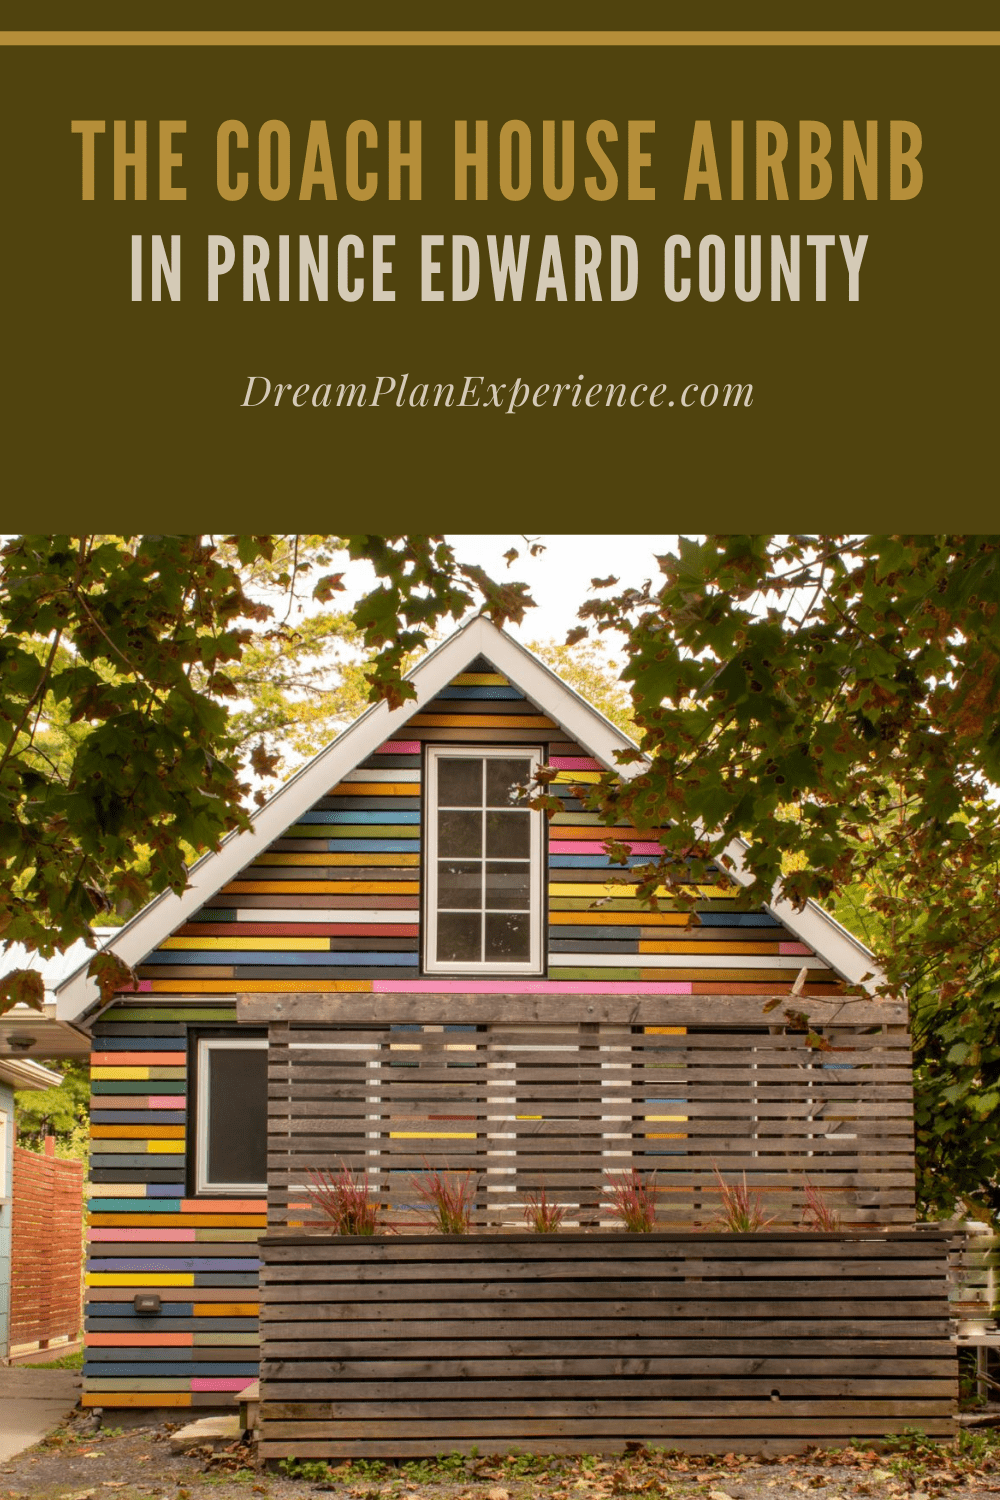 The Coach House is a cute 1-bedroom rental through Airbnb. It is located in Picton one of 3 small towns that sit in the sought-after destination in Ontario called Prince Edward County.